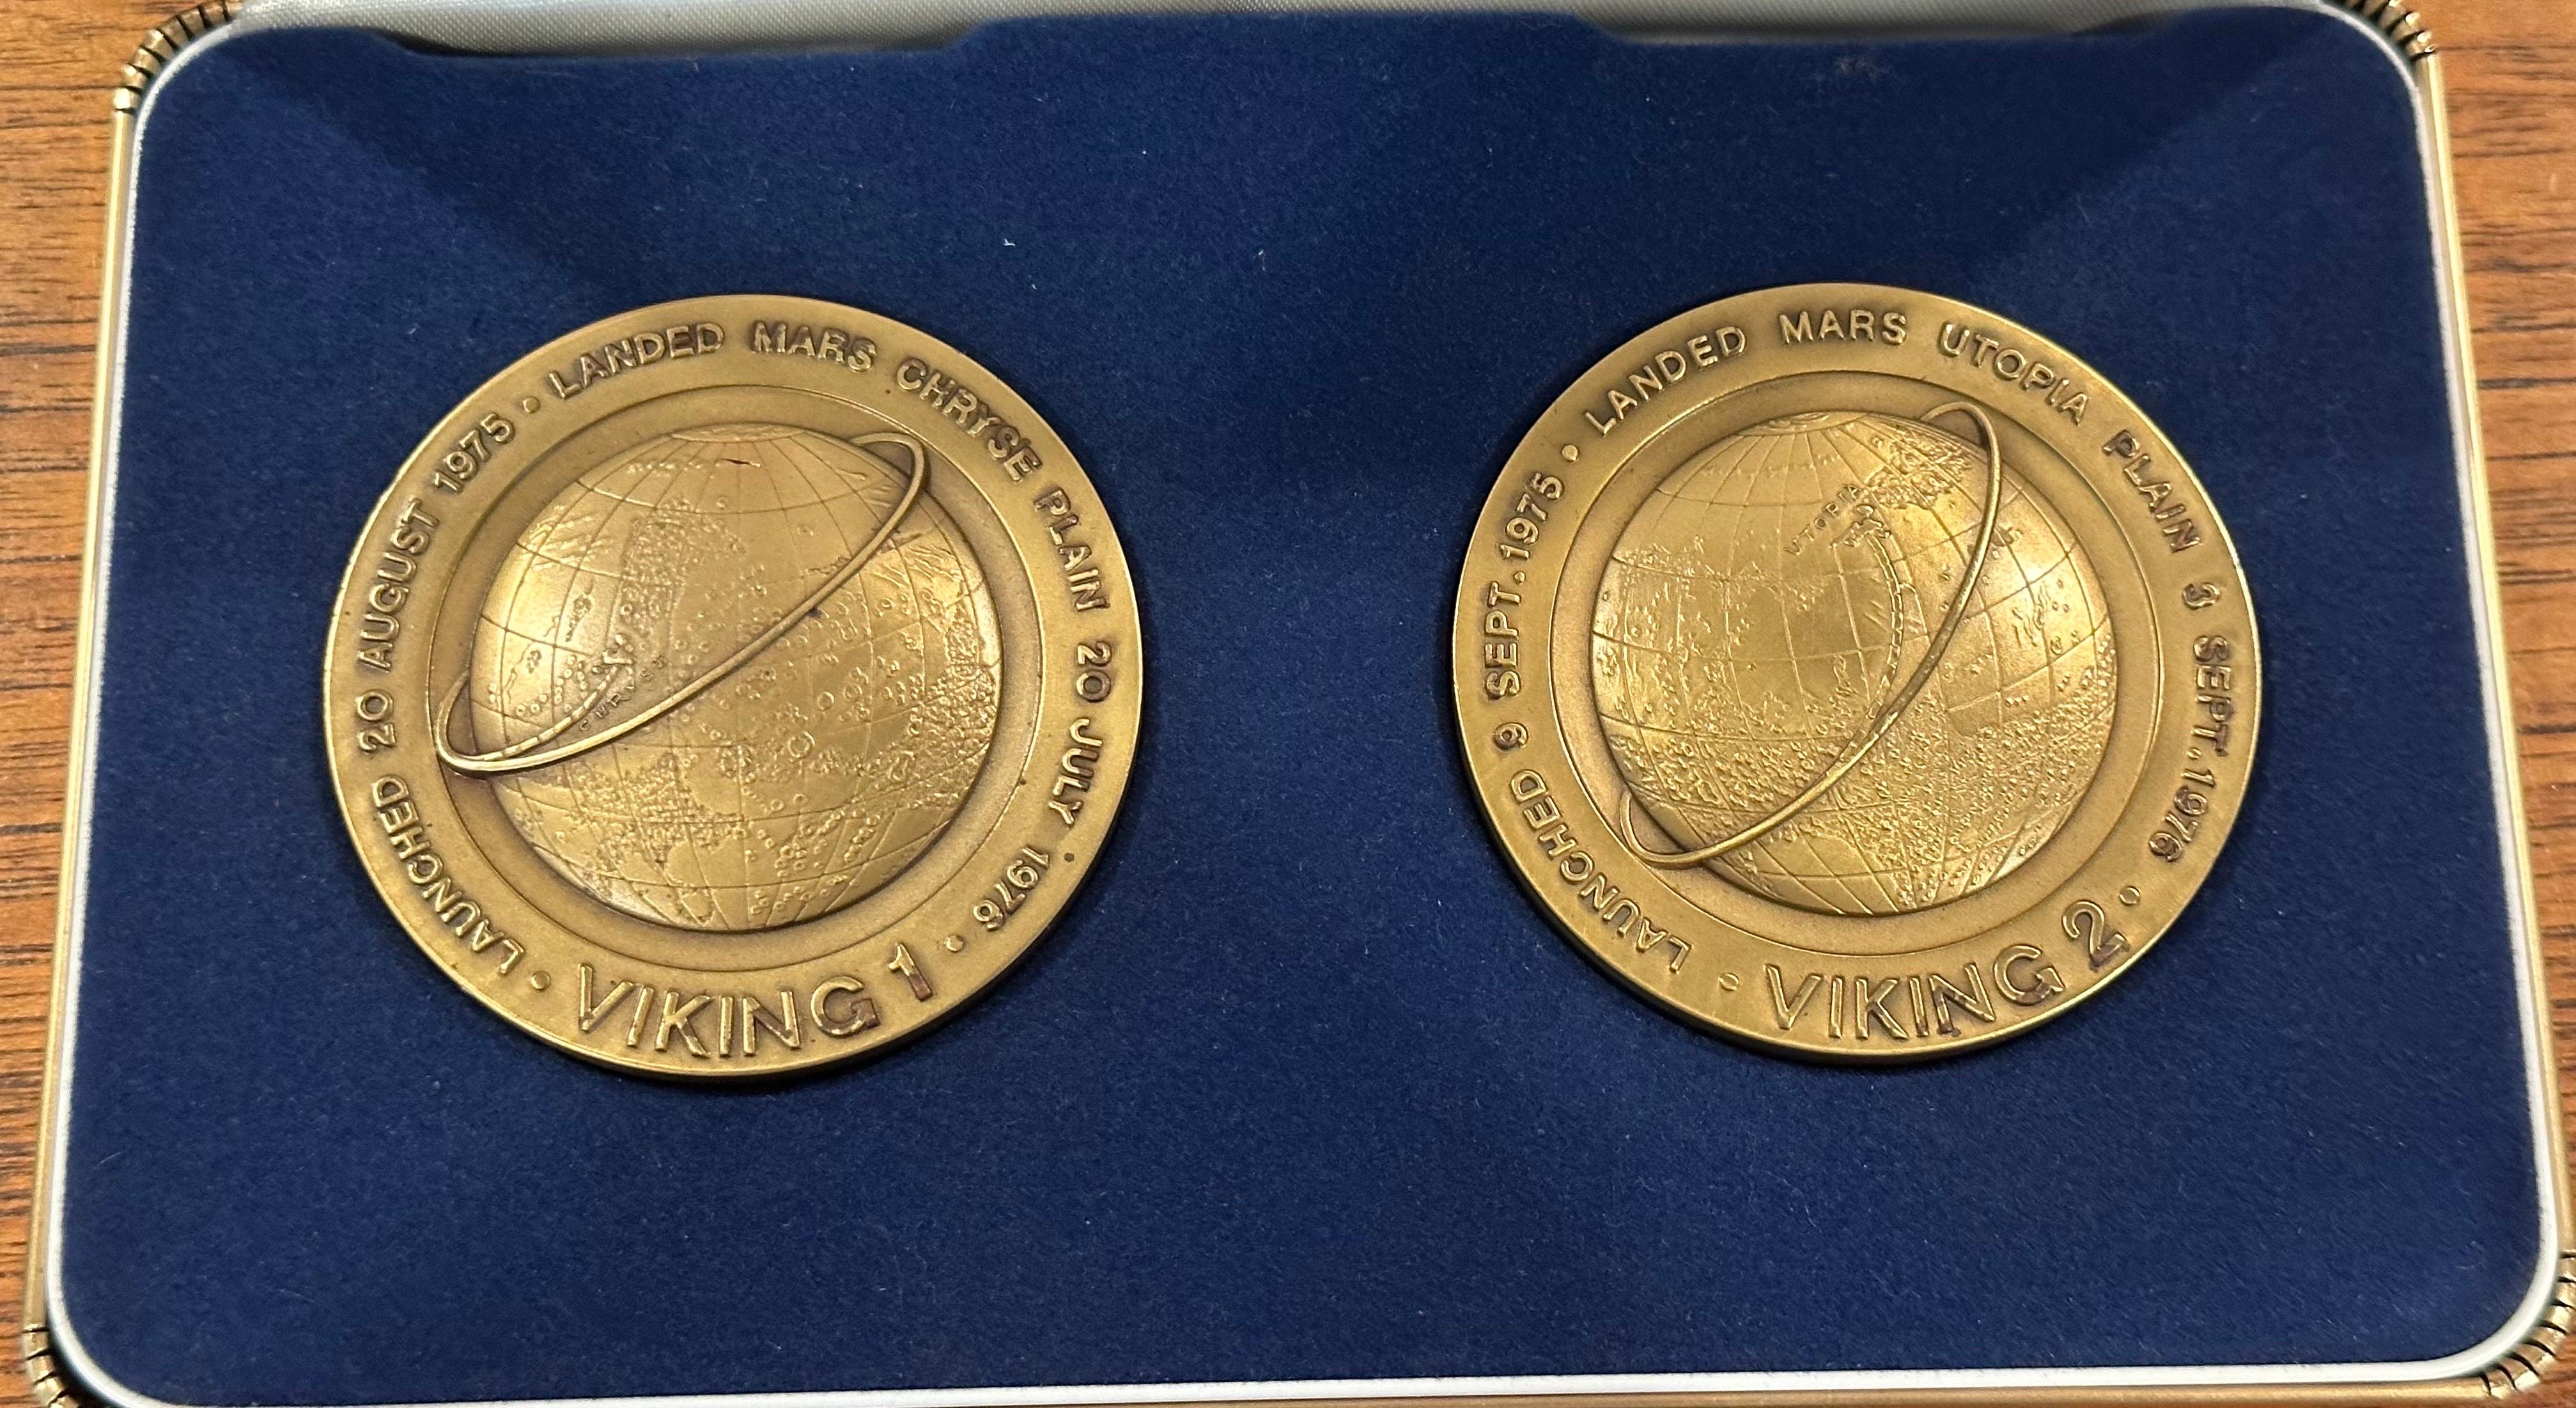 Pair of Bronze Viking 1 and 2 Mars Landing Commemorative Medallions For Sale 3